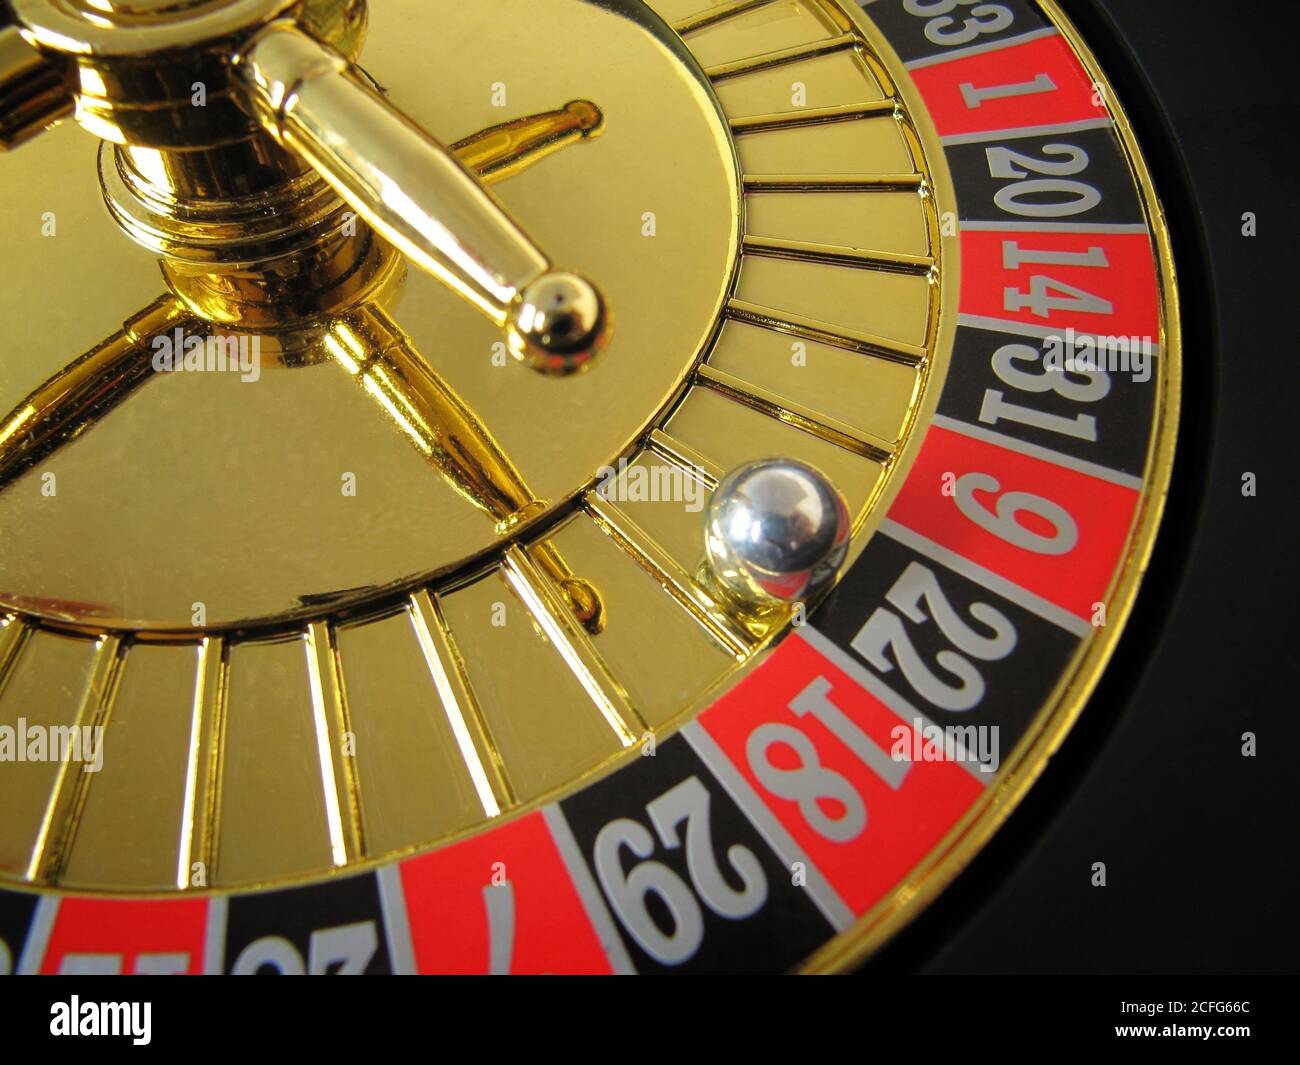 Roulette is a typical casino game of chance Stock Photo